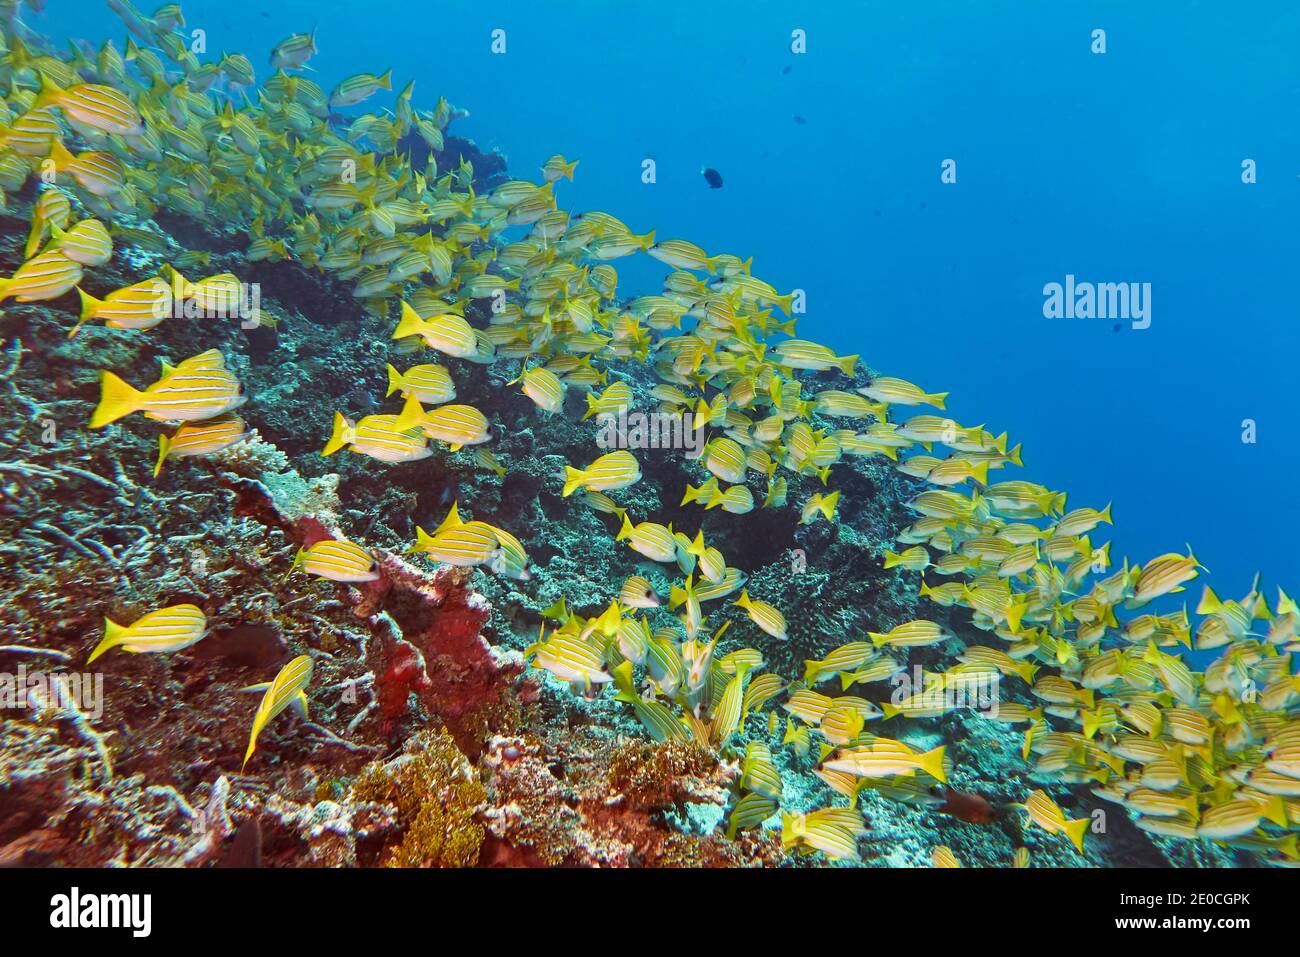 A shoal of Blue-striped Snappers (Lutjanus kasmira) swims across a tropical coral reef, in Gaafu Dhaalu atoll, The Maldives, Indian Ocean, Asia Stock Photo